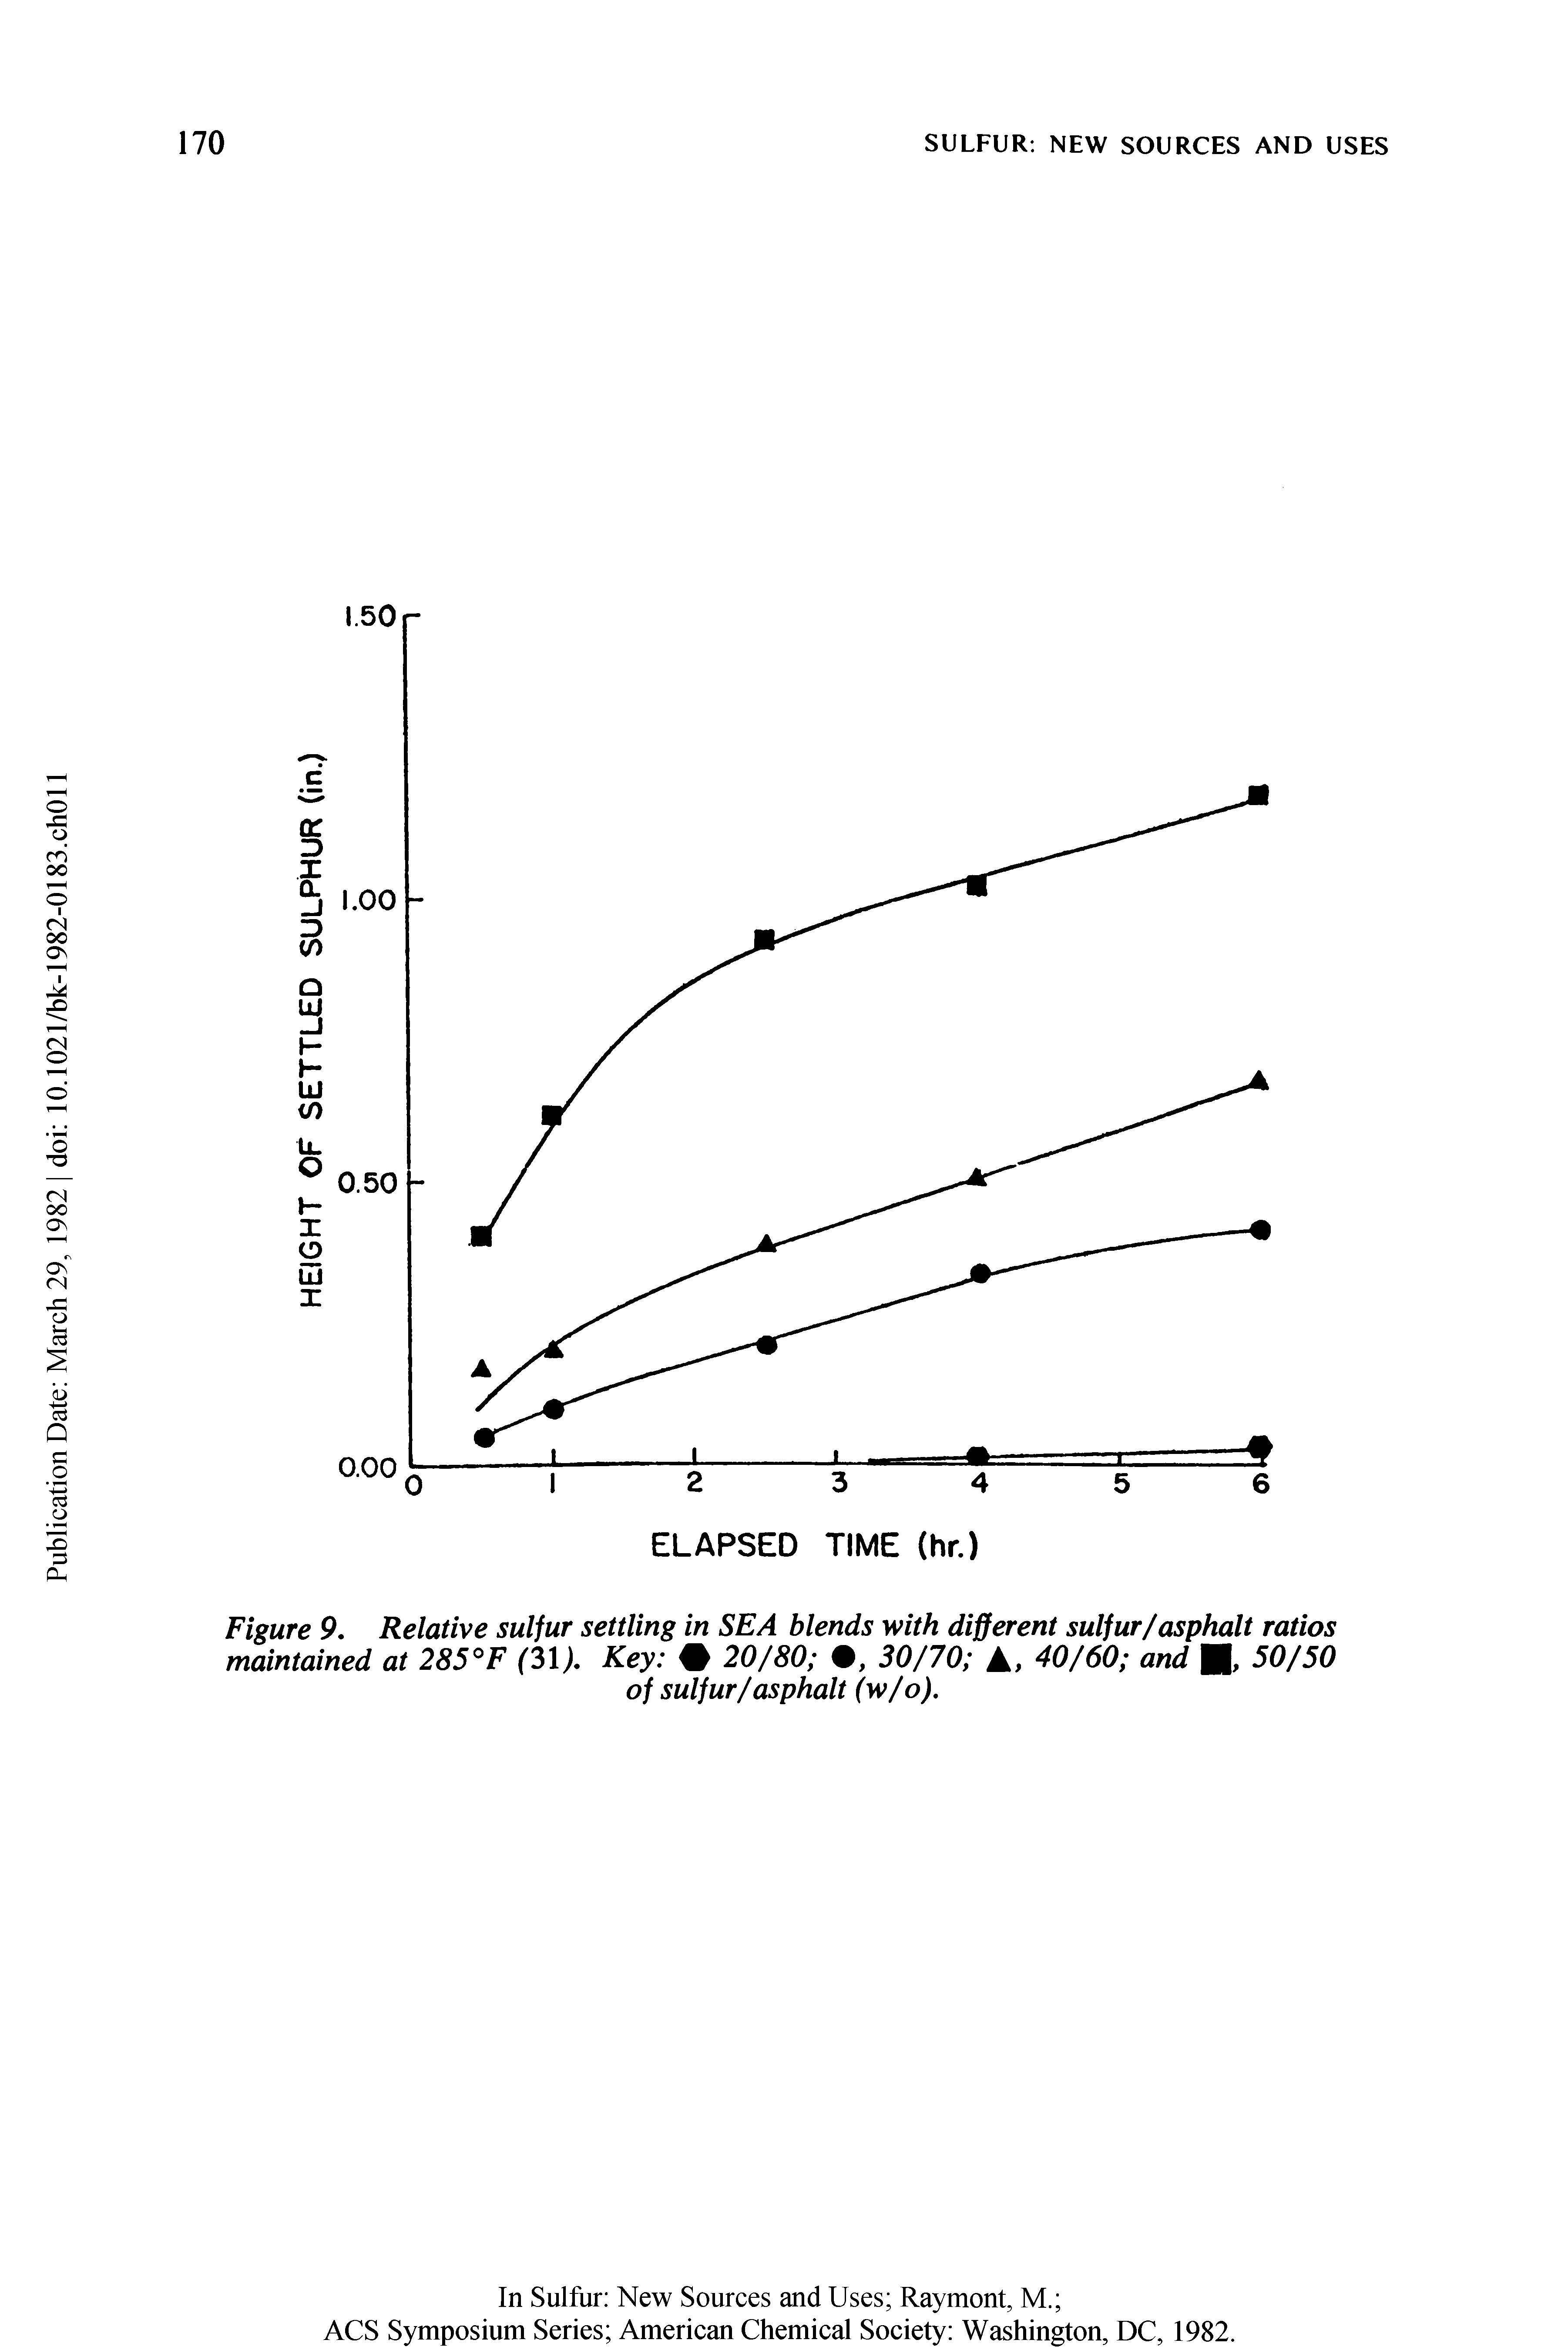 Figure 9. Relative sulfur settling in SEA blends with different sulfur/asphalt ratios maintained at 285°F (31). Key 20/80 , 30/70 A, 40/60 and M> 50/50...